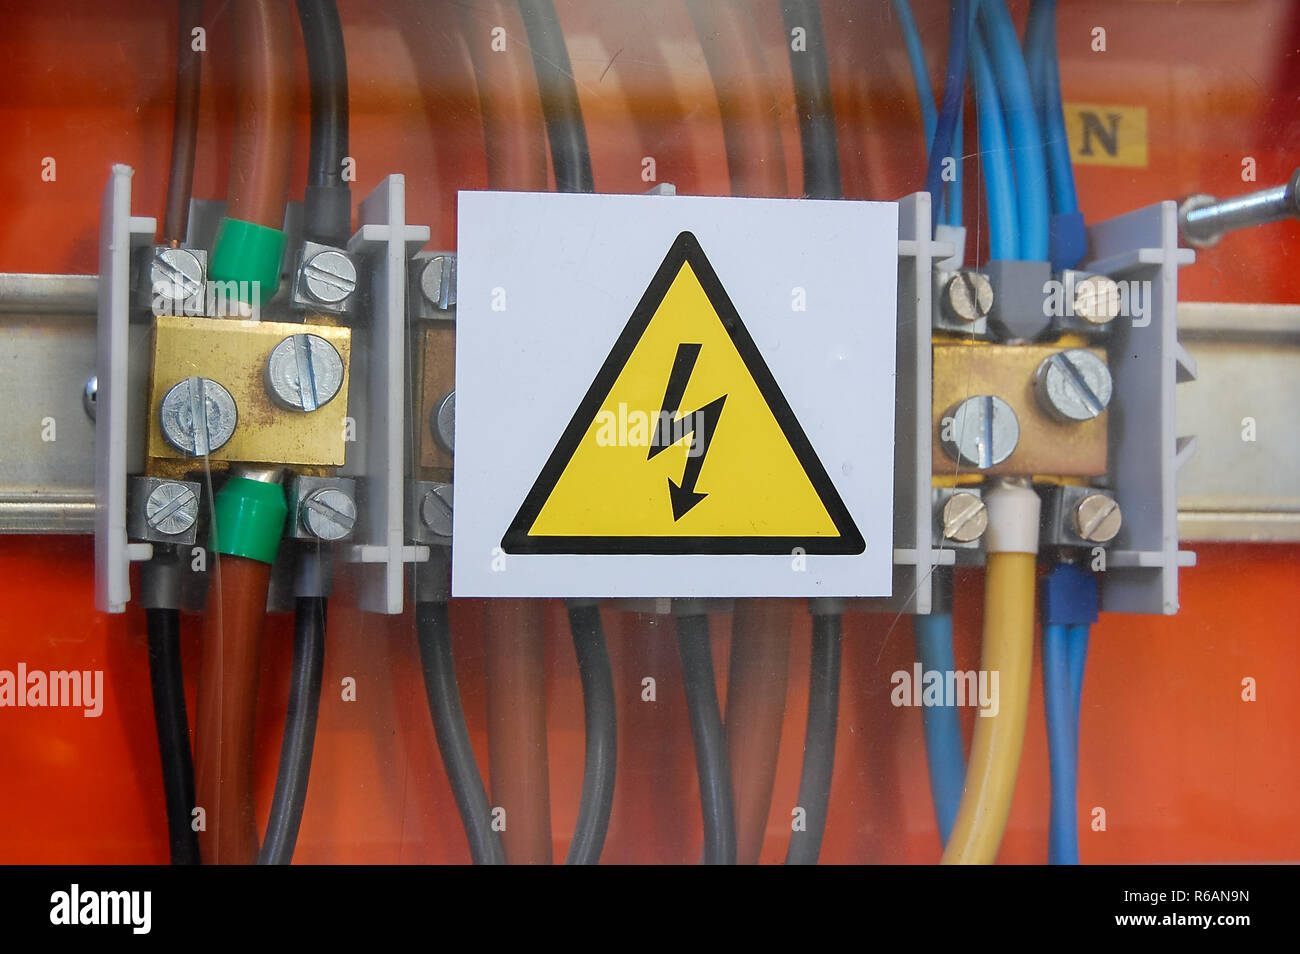 High voltage sign. Electrical relays and wires. Stock Photo